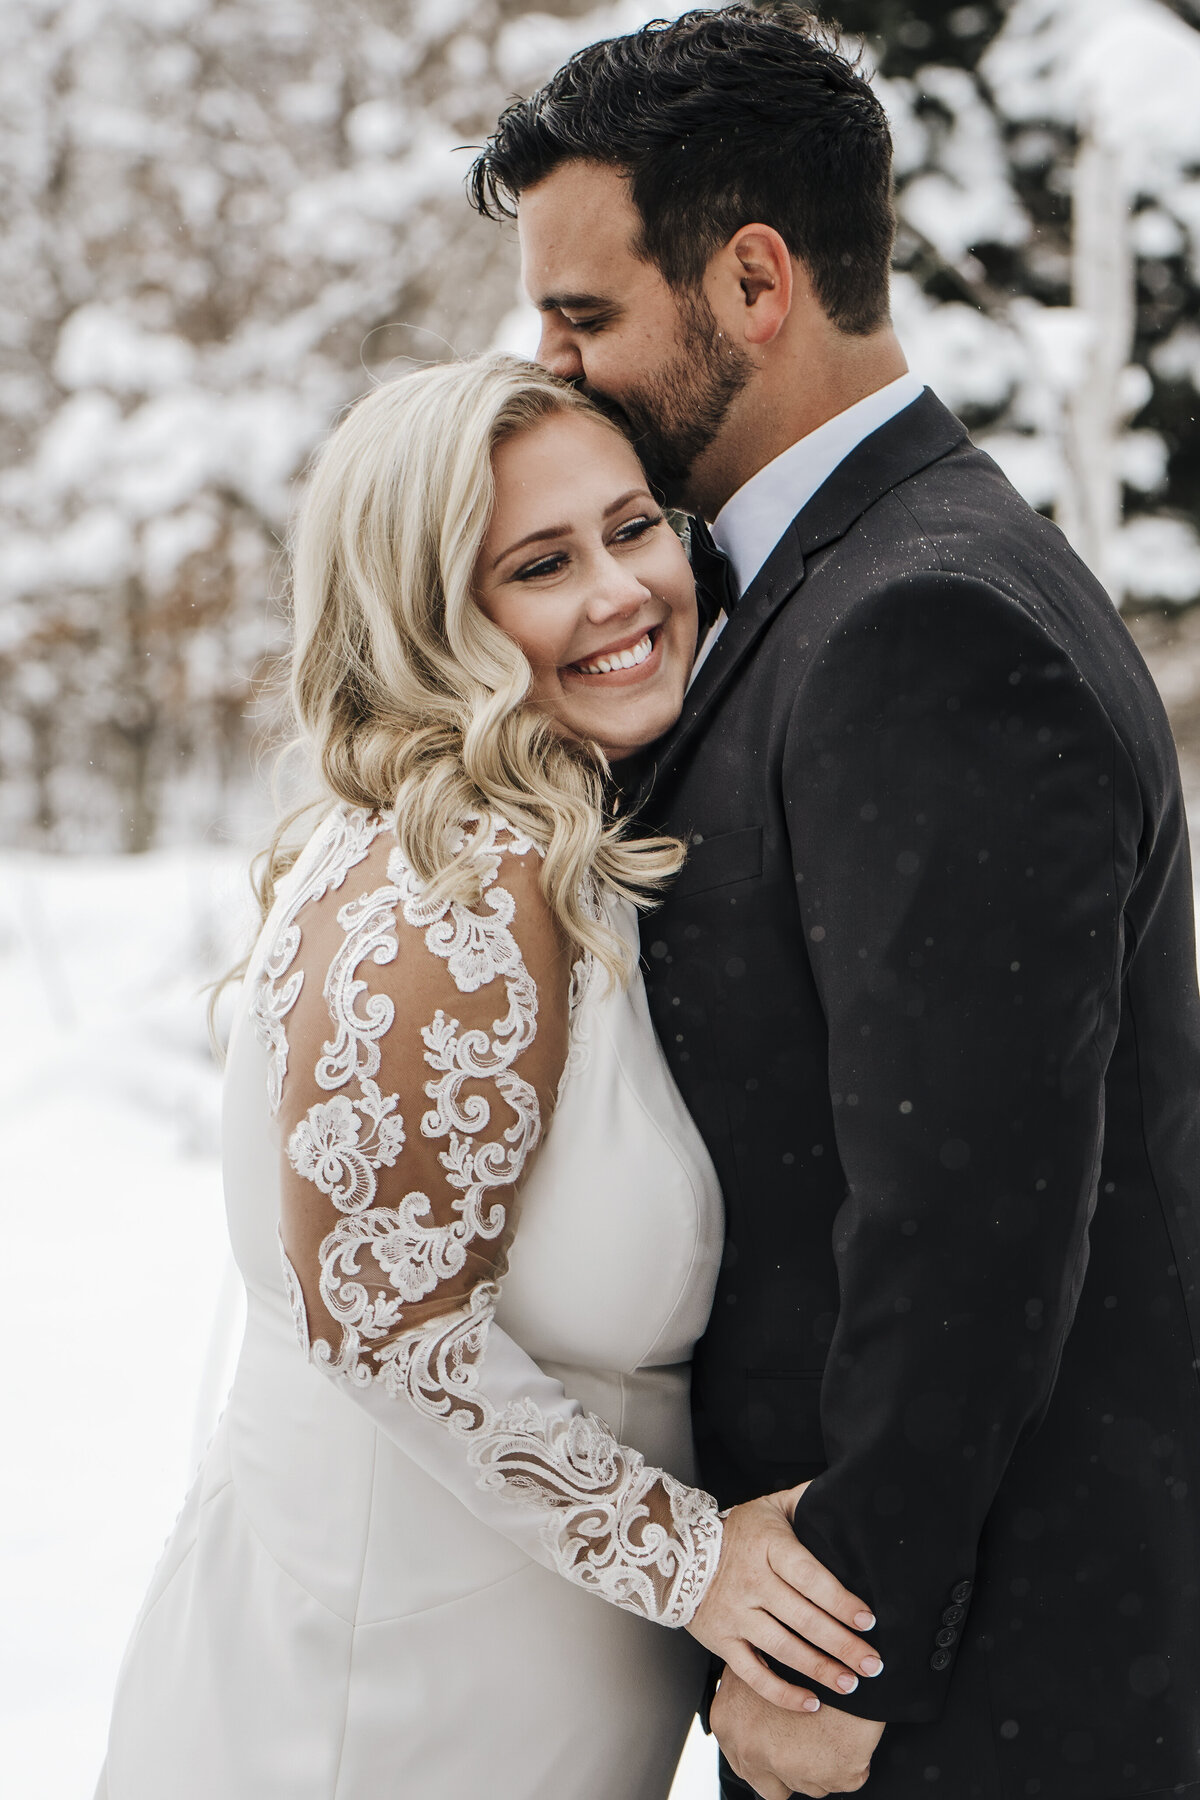 A couple sharing a tender moment in a winter wonderland, with gentle snowflakes adding a touch of magic to their embrace. Taken by jen Jarmuzek photography a Minneapolis wedding photographer